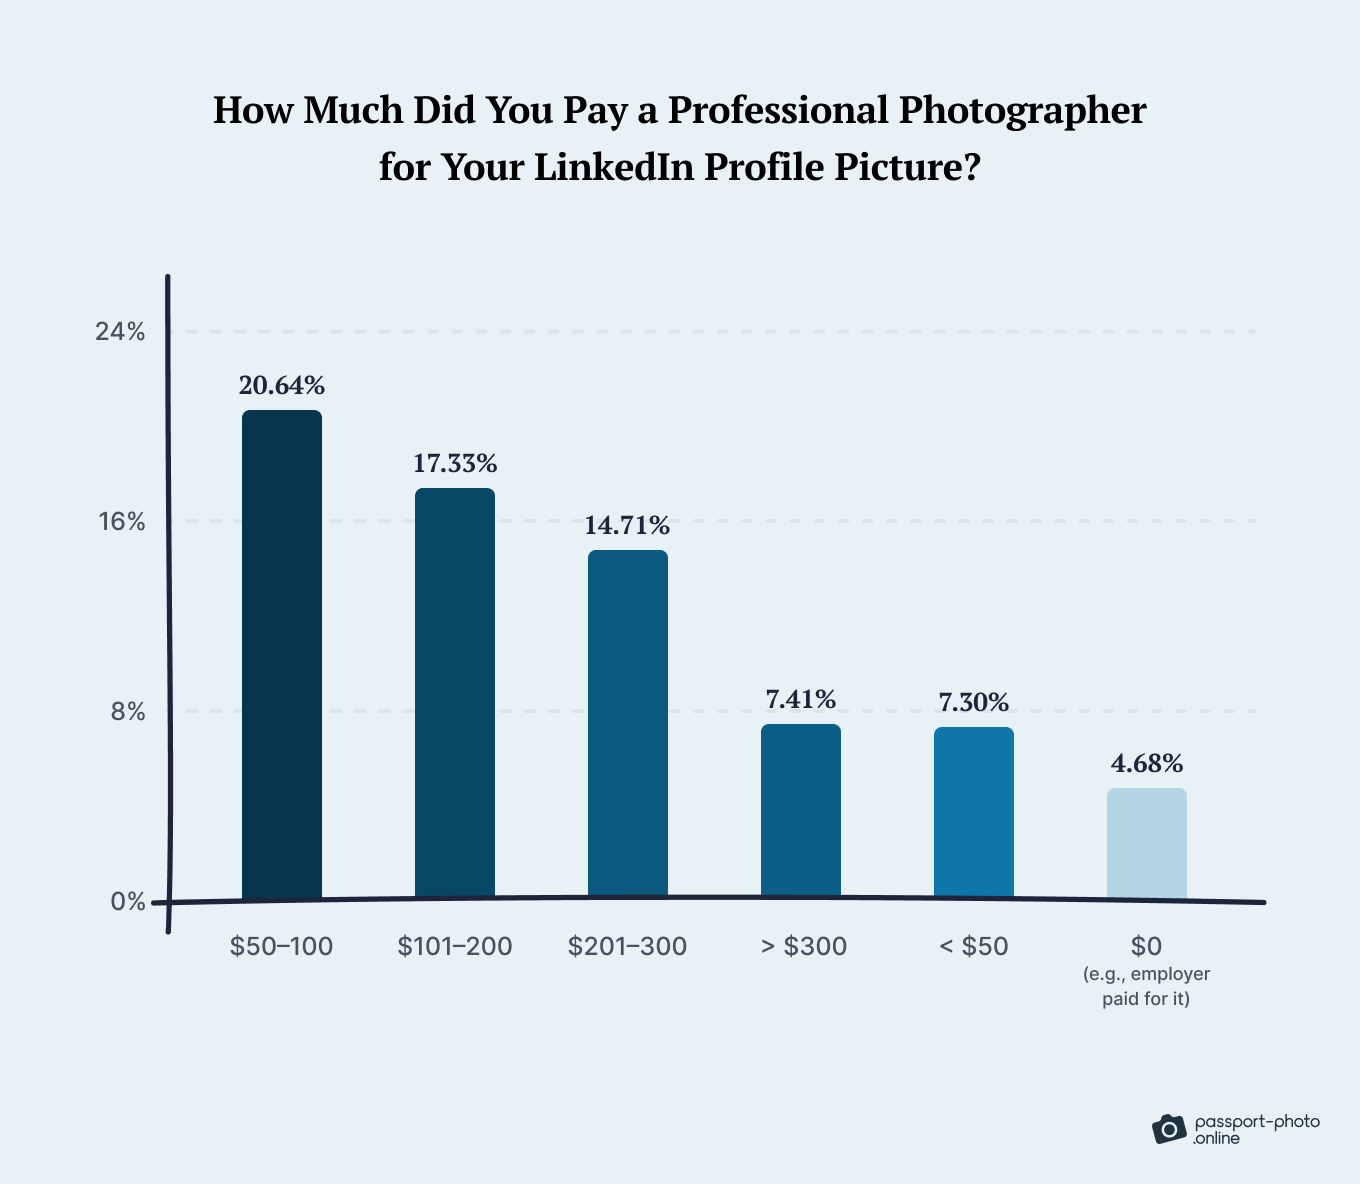 Most respondents spent between $50–100 on their professional LinkedIn photos, with a few either spending more, less or nothing at all